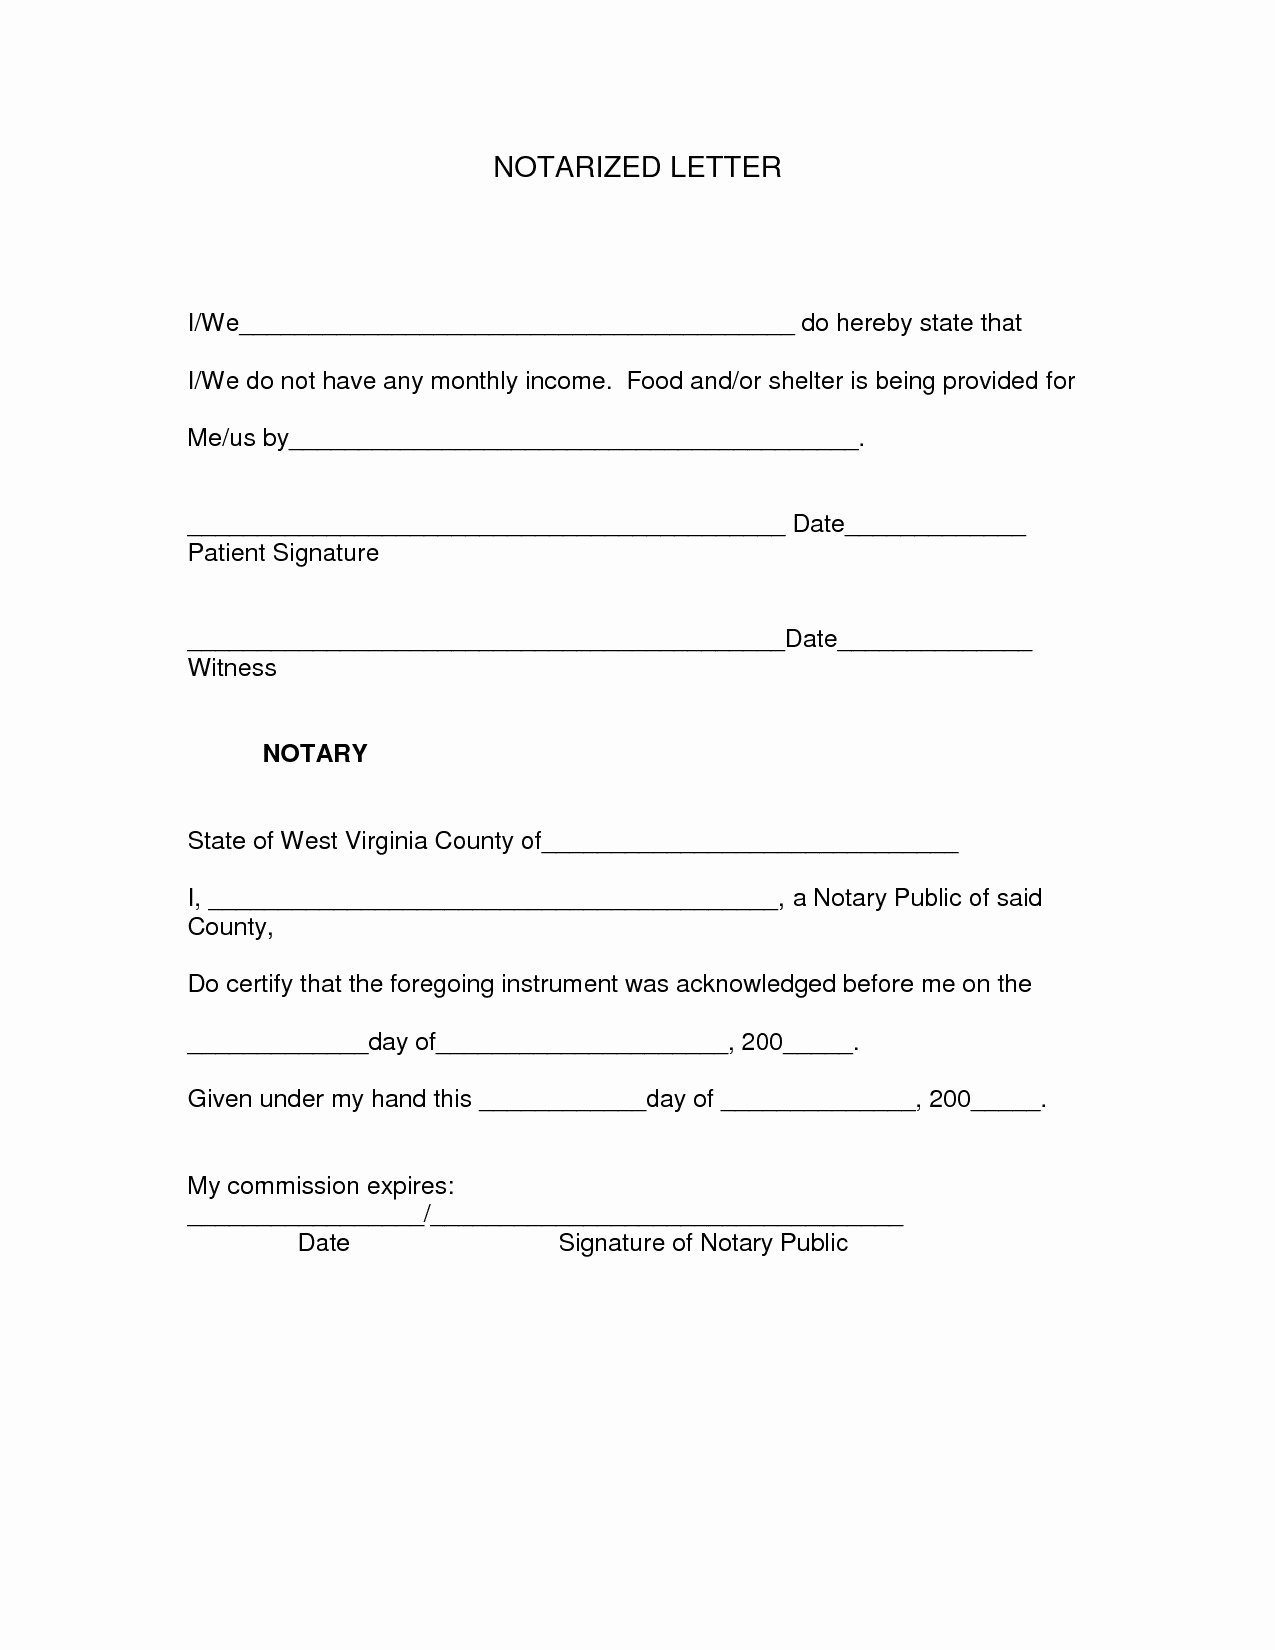 Notary Public Resume Sample Awesome Notary Letter Template Examples